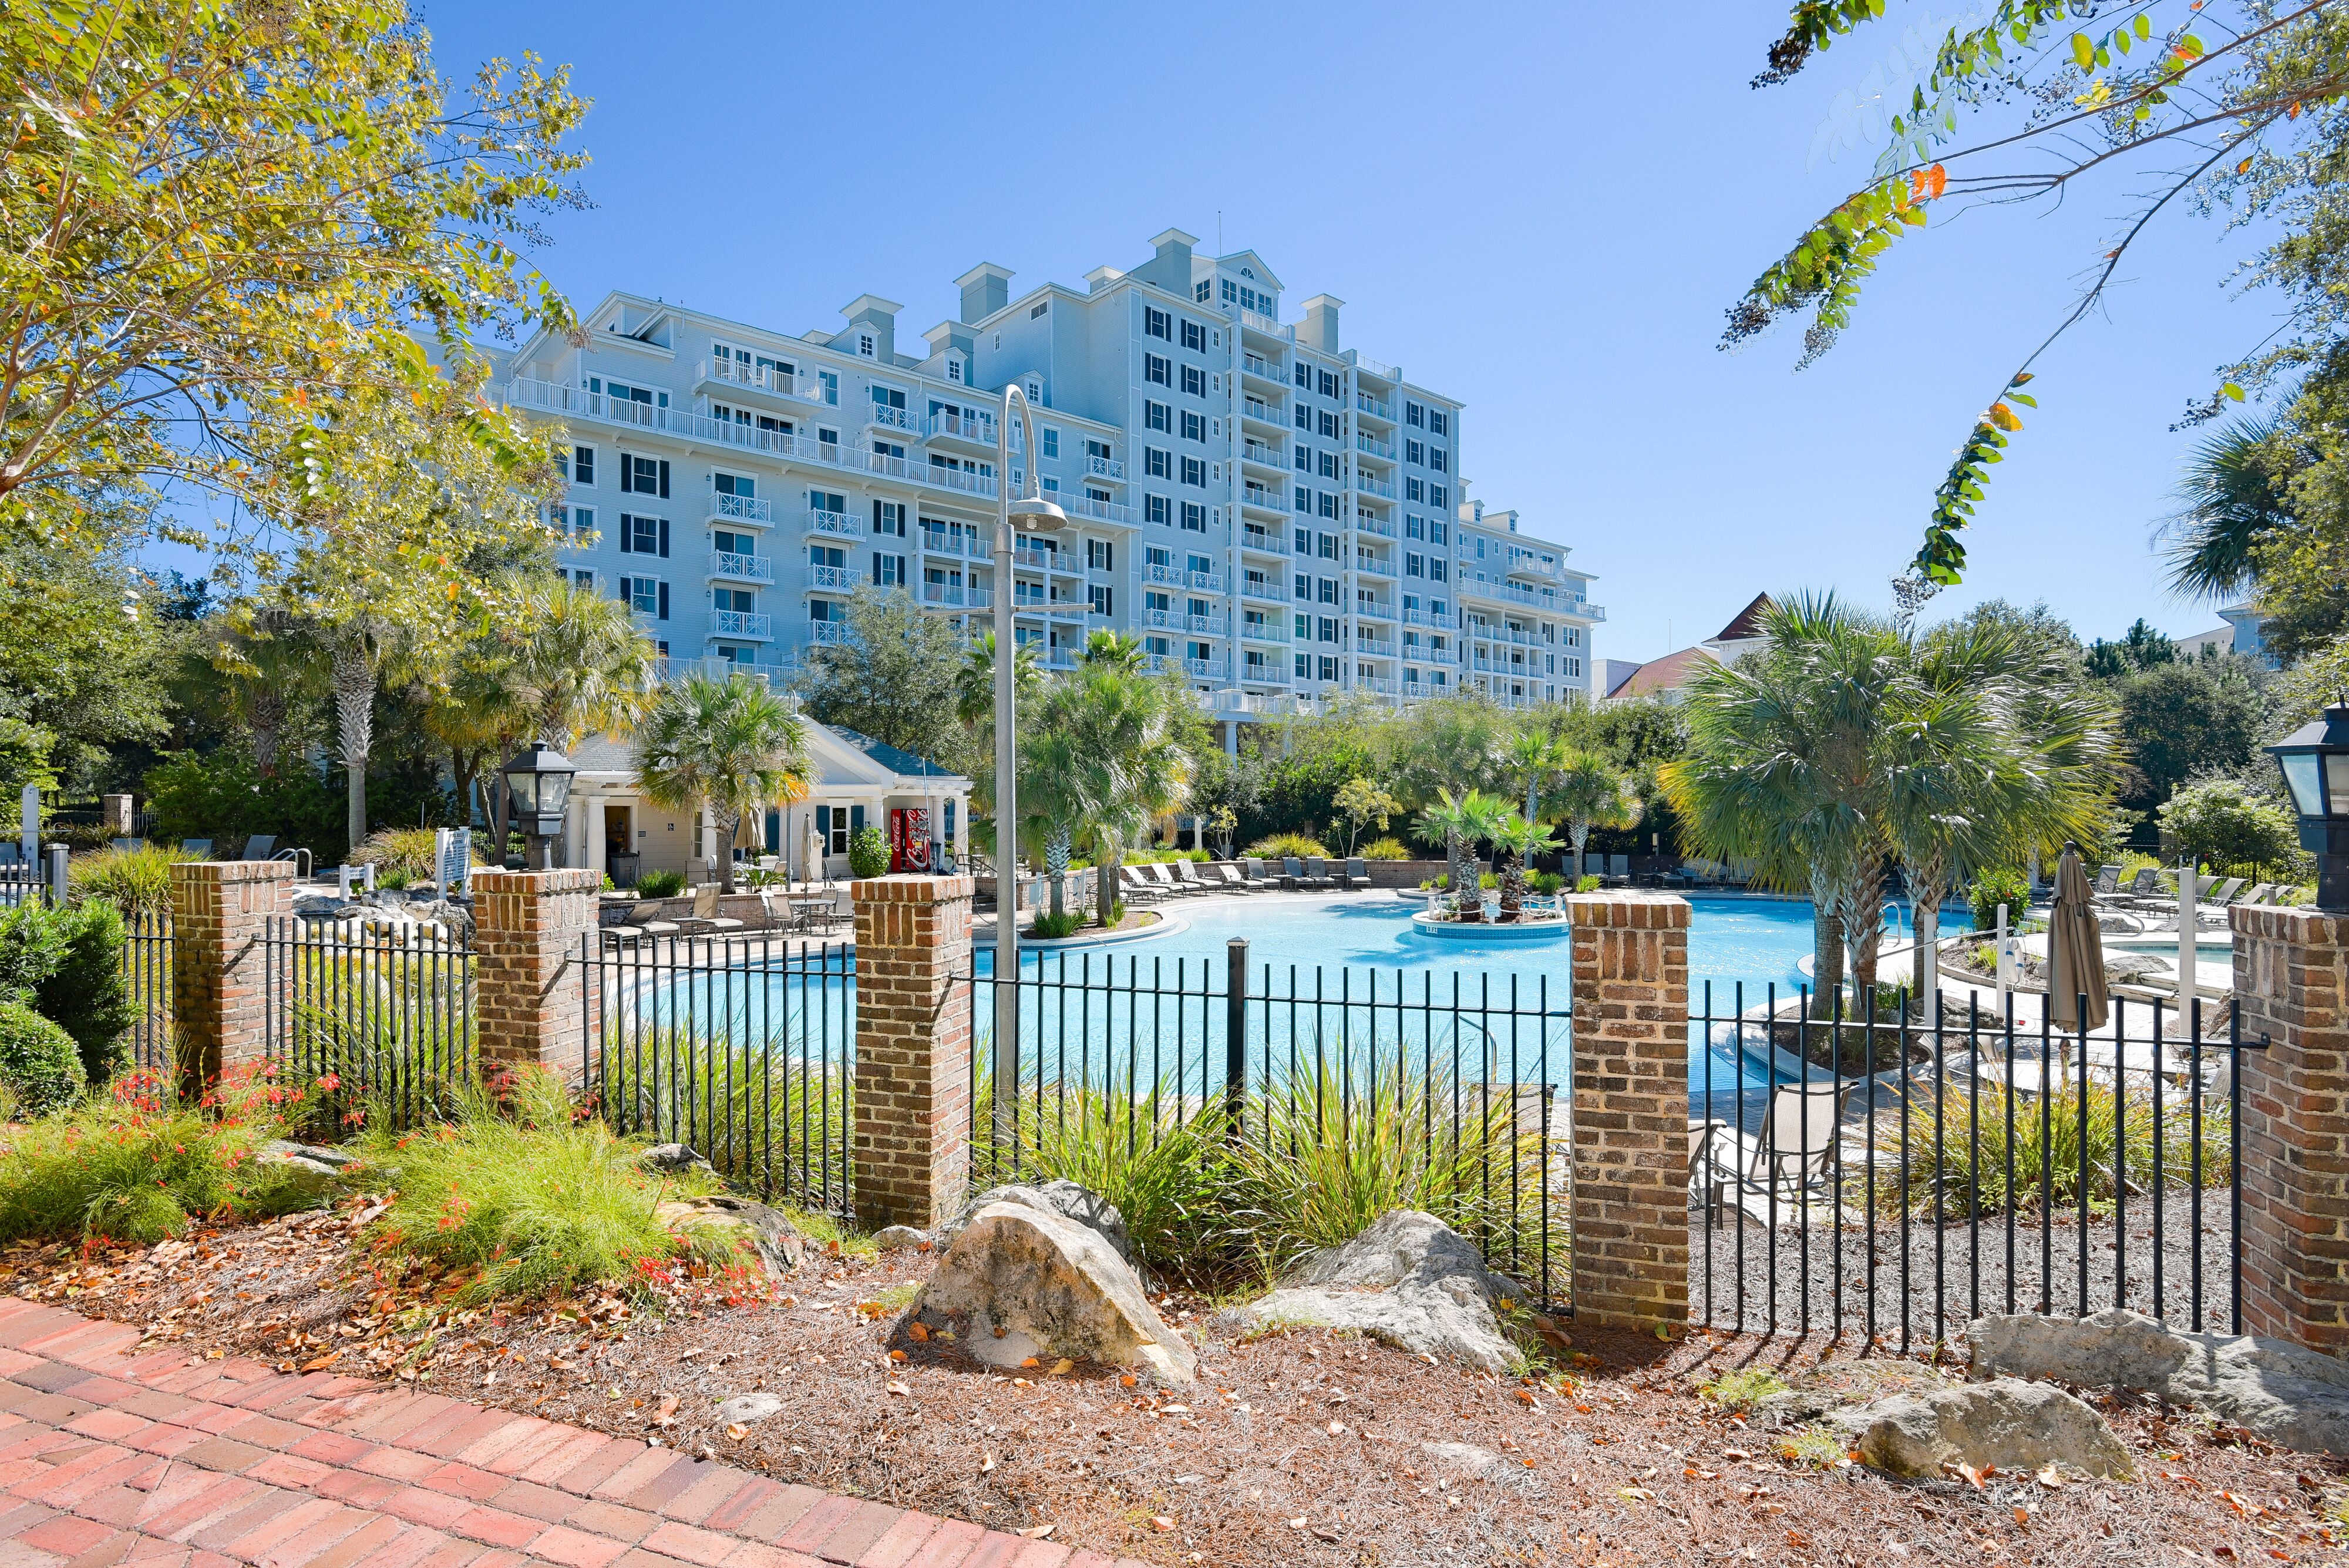 Your rental is located in the LaSata at Sandestin® Golf and Beach Resort.